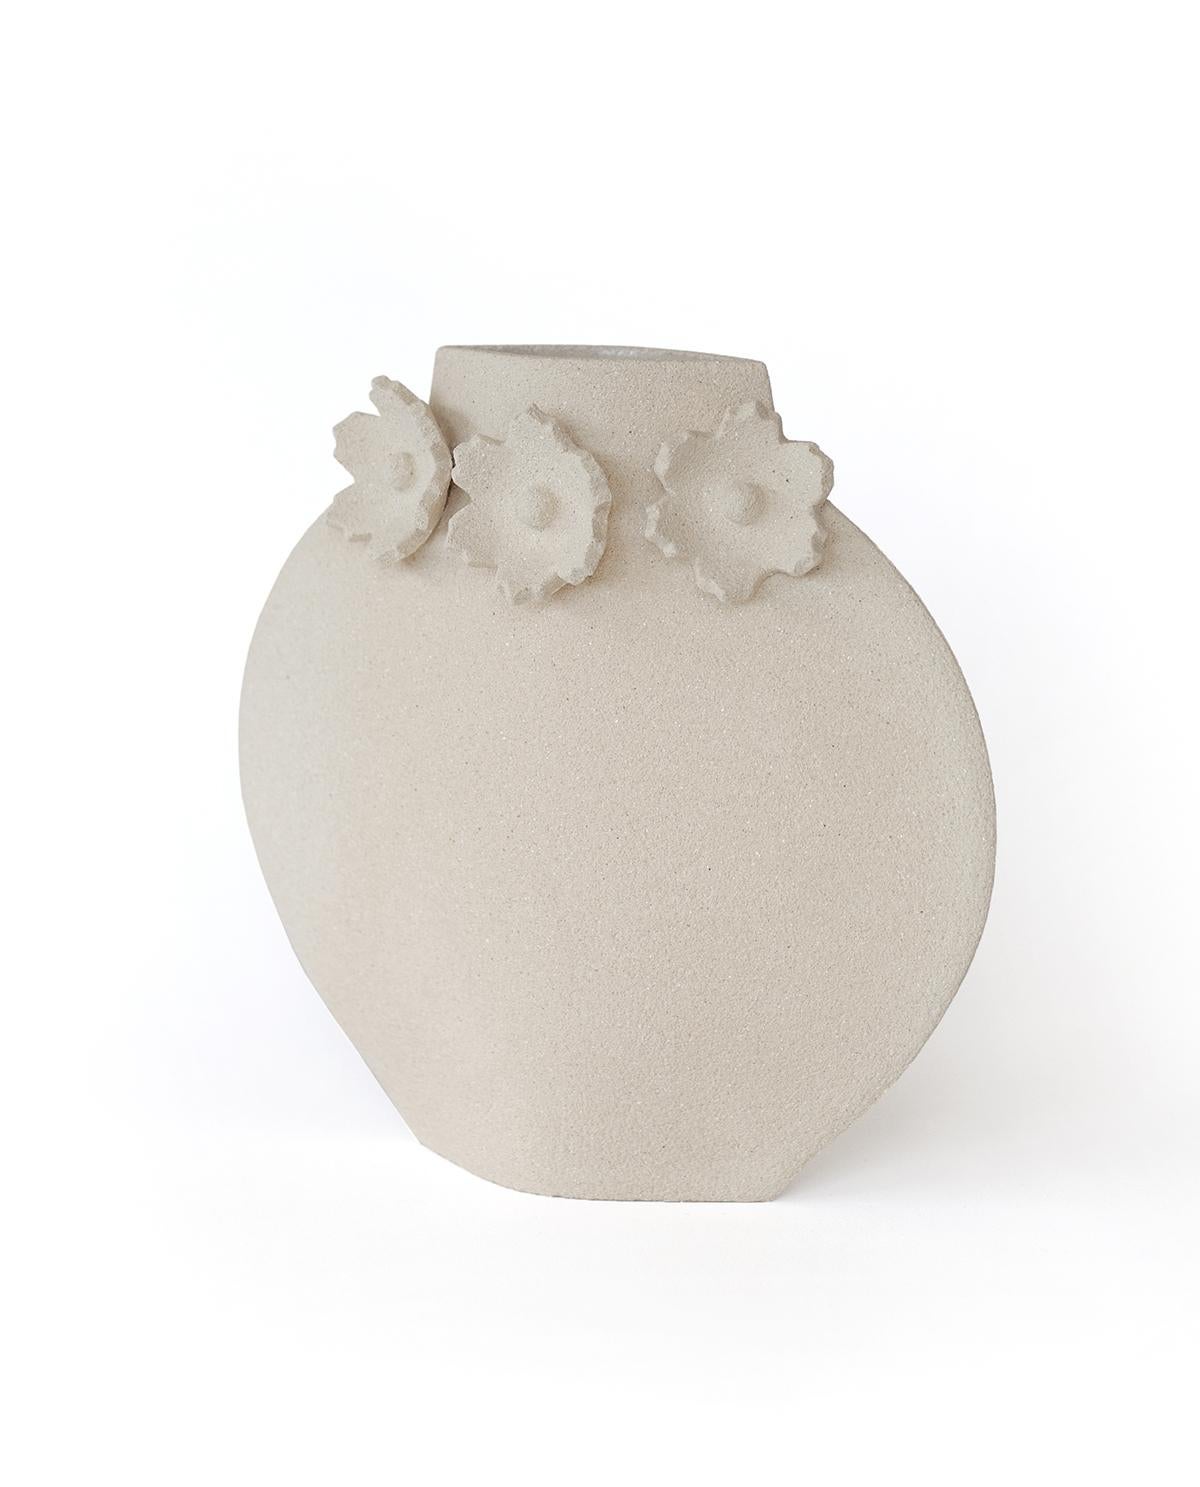 'Sculptural Flowers' Handmade White Ceramic Vase

This vase is part of a new series inspired by flowers (and more generally organic elements). Here is our Lune [M] model with motifs of camellia flowers. They are hand-sculpted and attached to the